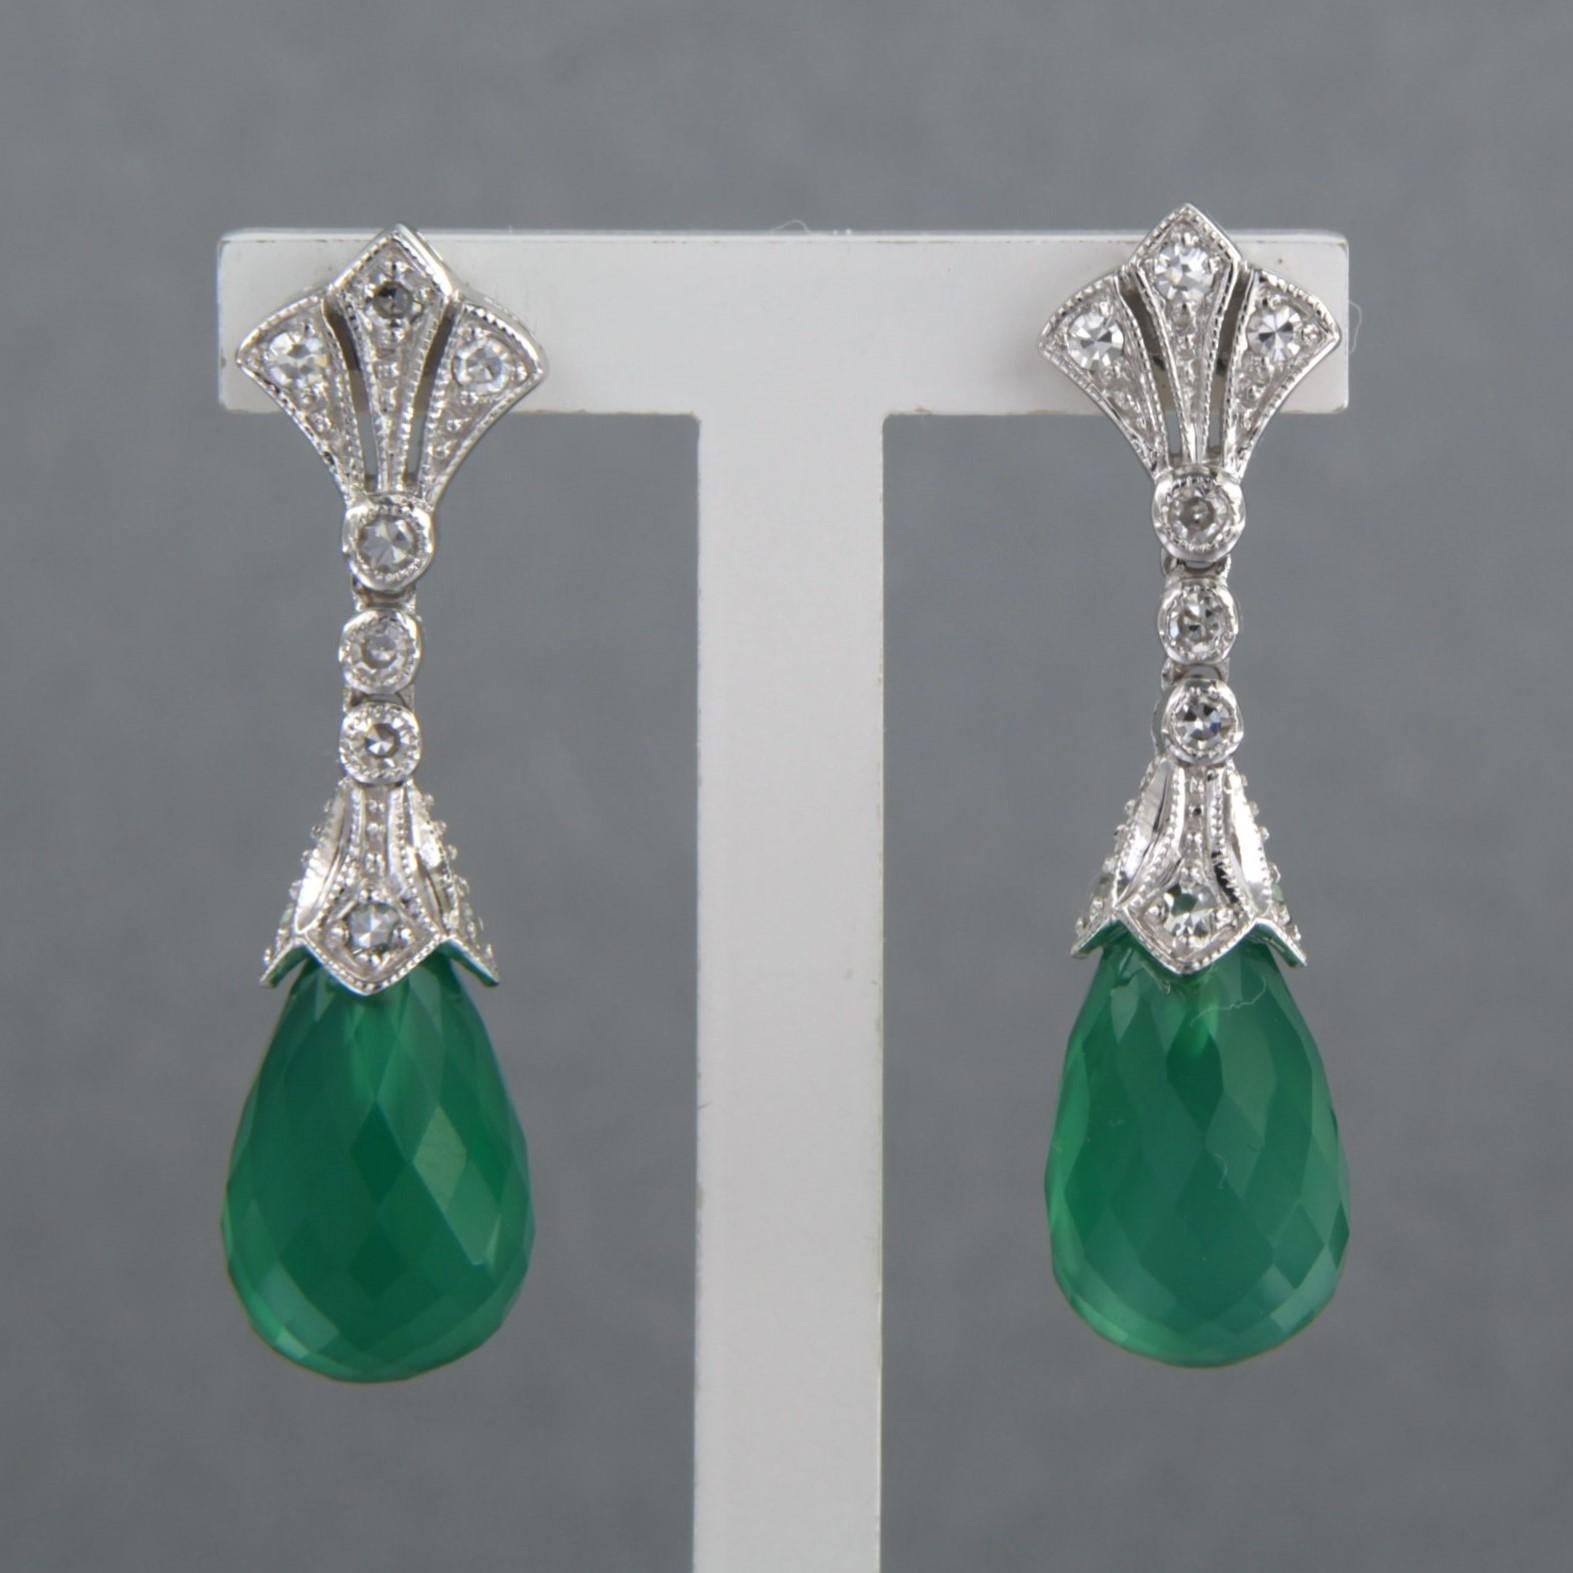 14 kt white gold earrings set with green onyx and single cut diamond total 0.34 carat - F/G - VS/SI

detailed description

The earrings are 8.0 mm wide and 3.1 cm high

weight: 5.5 grams

set with :

- 2 x 12.0 mm x 8.0 mm briolette facet cut green